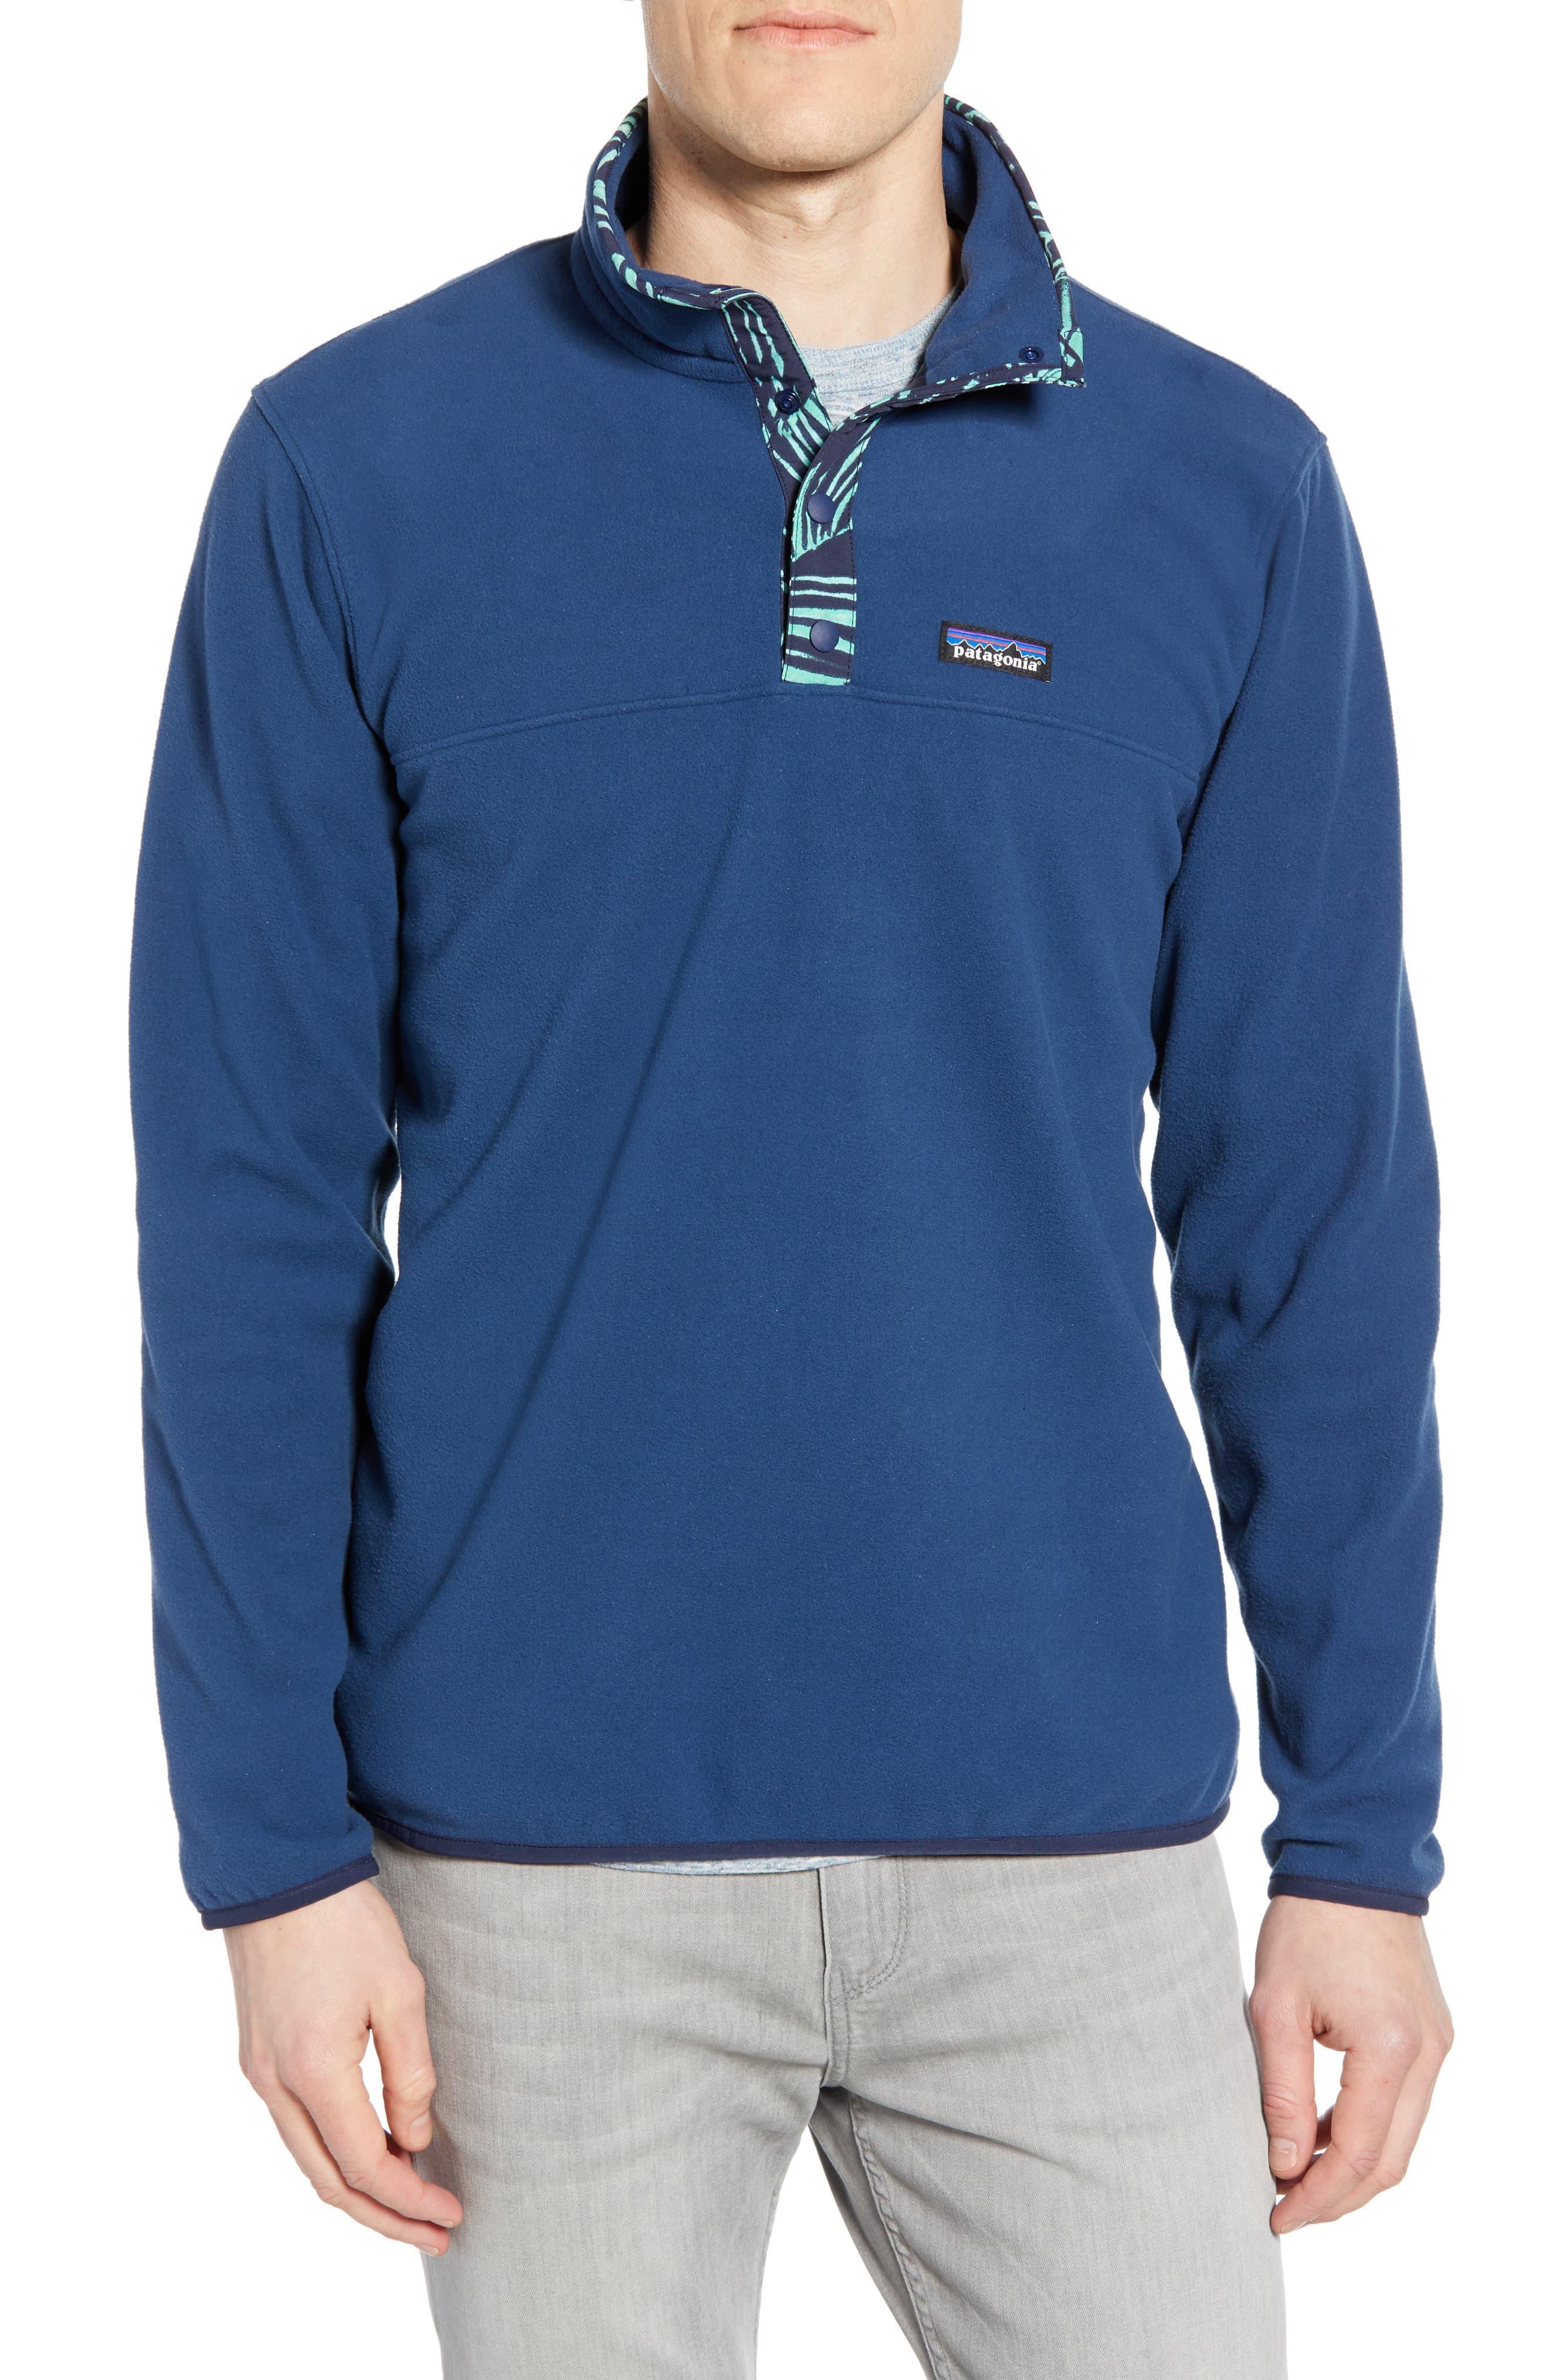 Patagonia Micro-d Snap-t Fleece Pullover in Blue for Men - Lyst